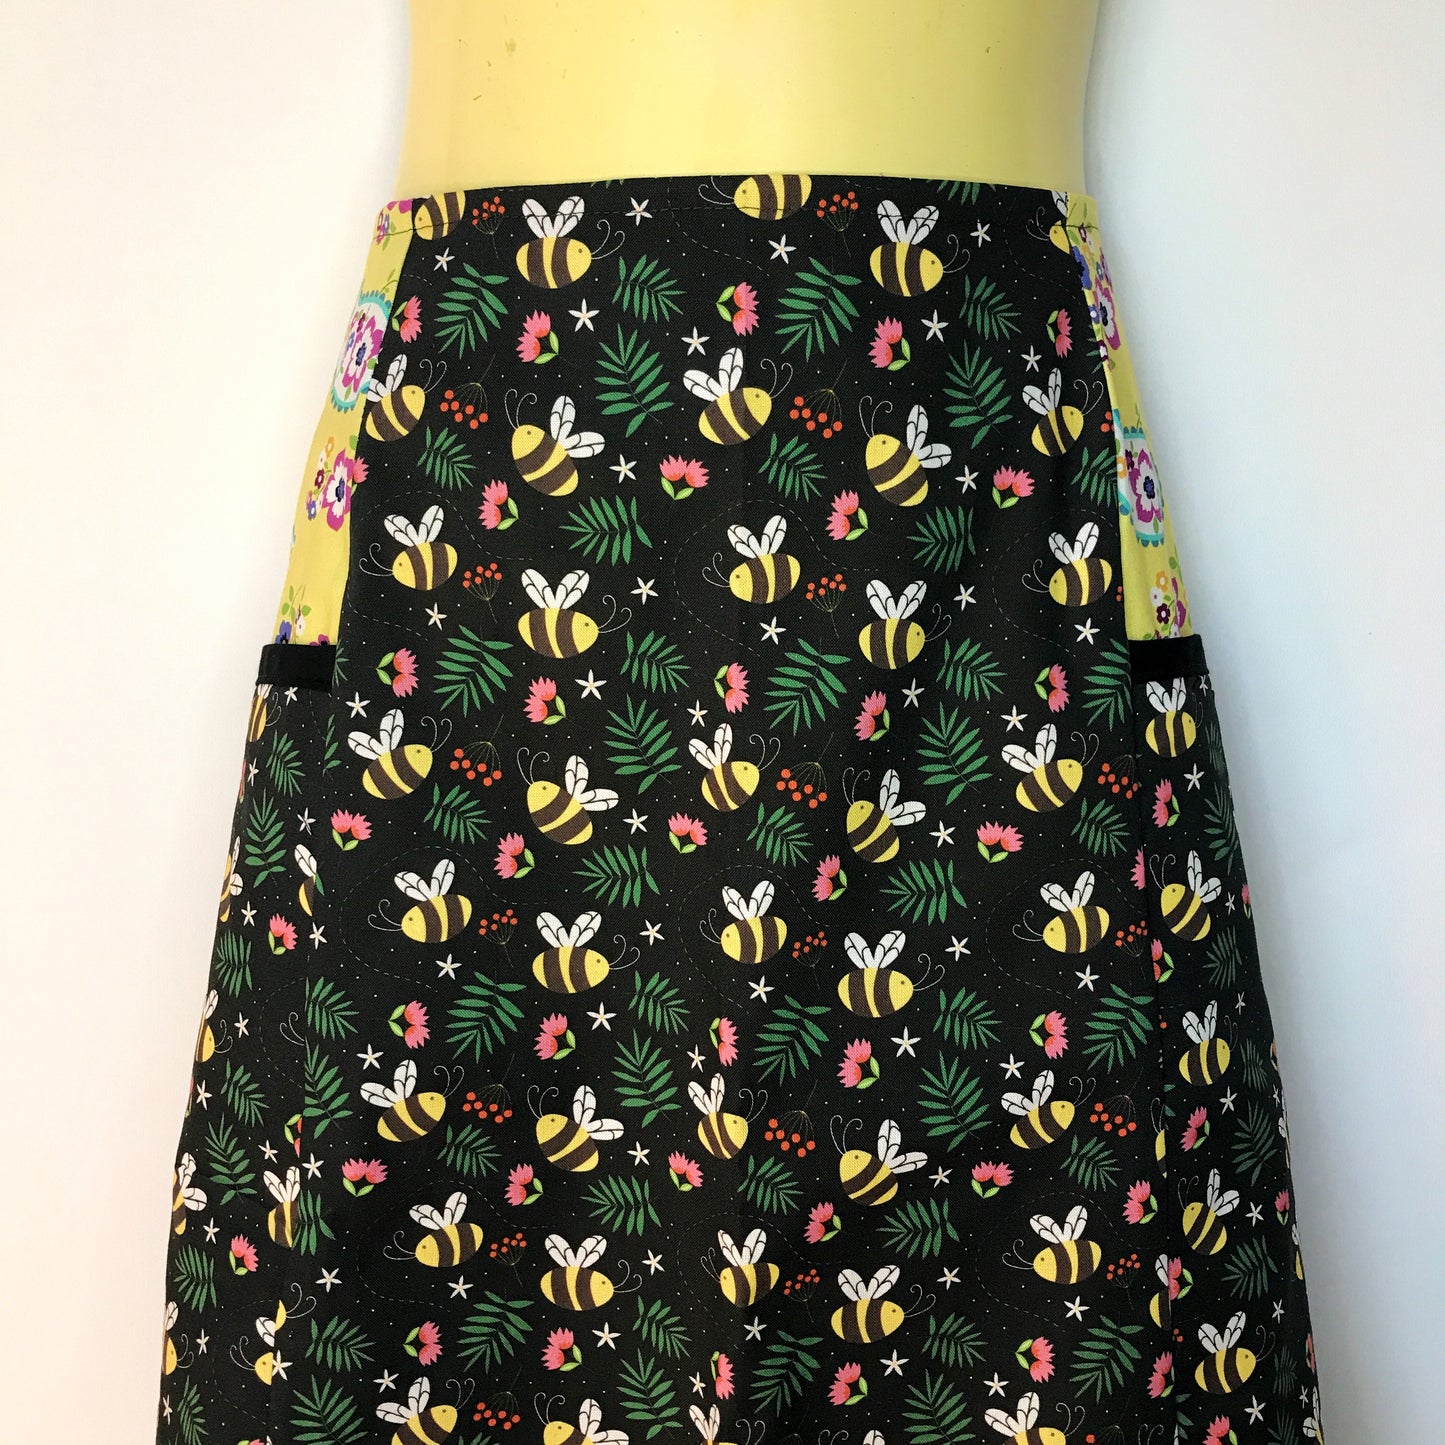 Ladies A Line Skirt - Bumble bees - sizes 8 - 18